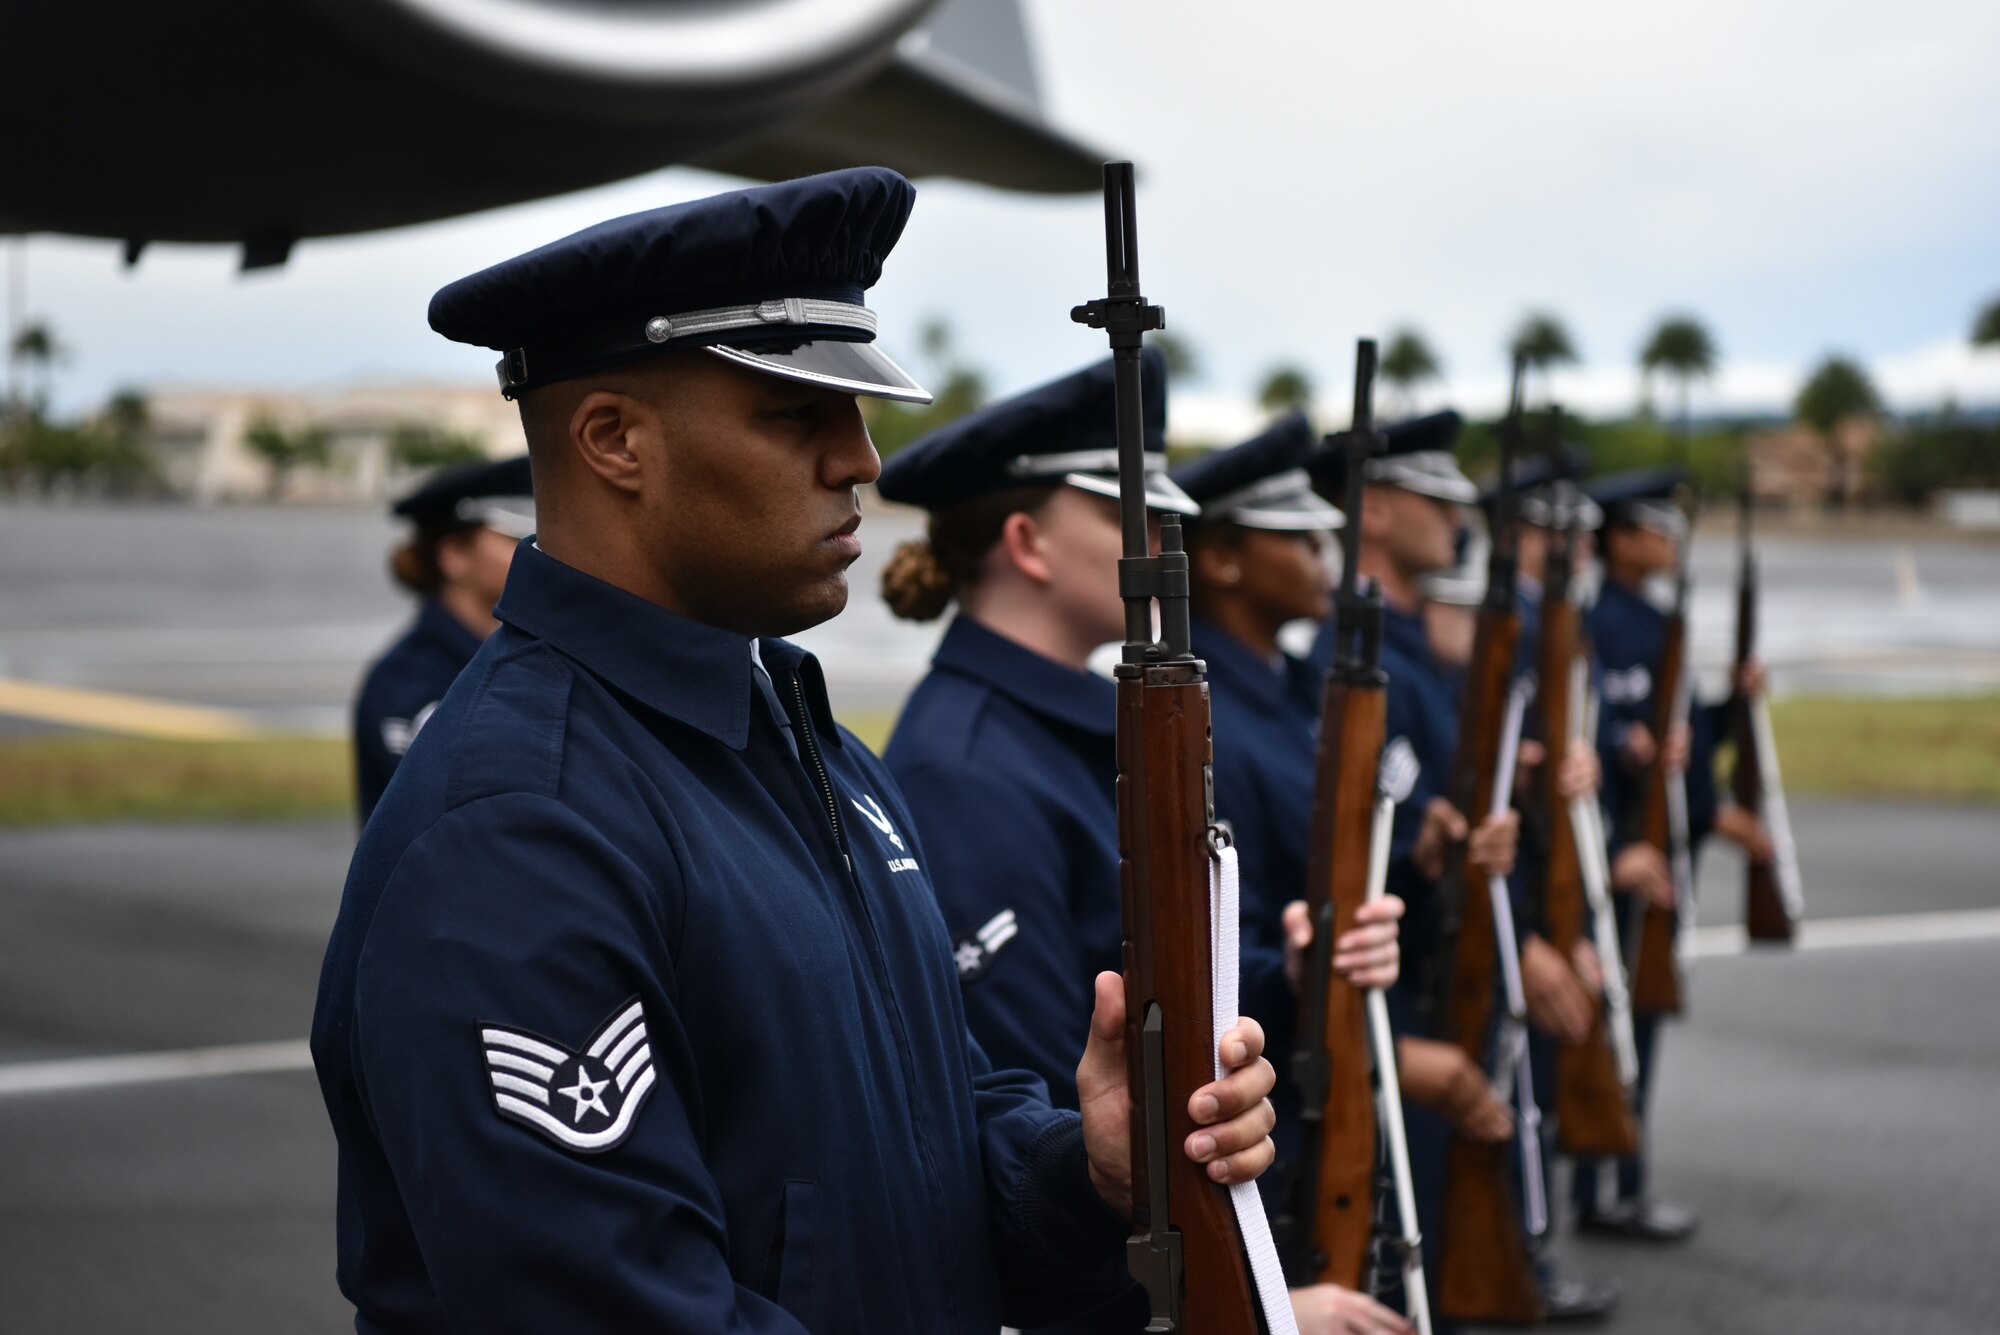 The Honor Guard practices performing a three-volley salute before the December 7th Remembrance Ceremony at Joint Base Pearl Harbor-Hickam, Hawaii, Dec. 7, 2021. Historically, three volleys of rifle fire were fired to indicate that the casualties had been cared for in a combat environment, and that the fighting could resume. As time passed, these volleys became an official military custom that survives to this day. (U.S. Air Force photo by 1st Lt. Benjamin Aronson)